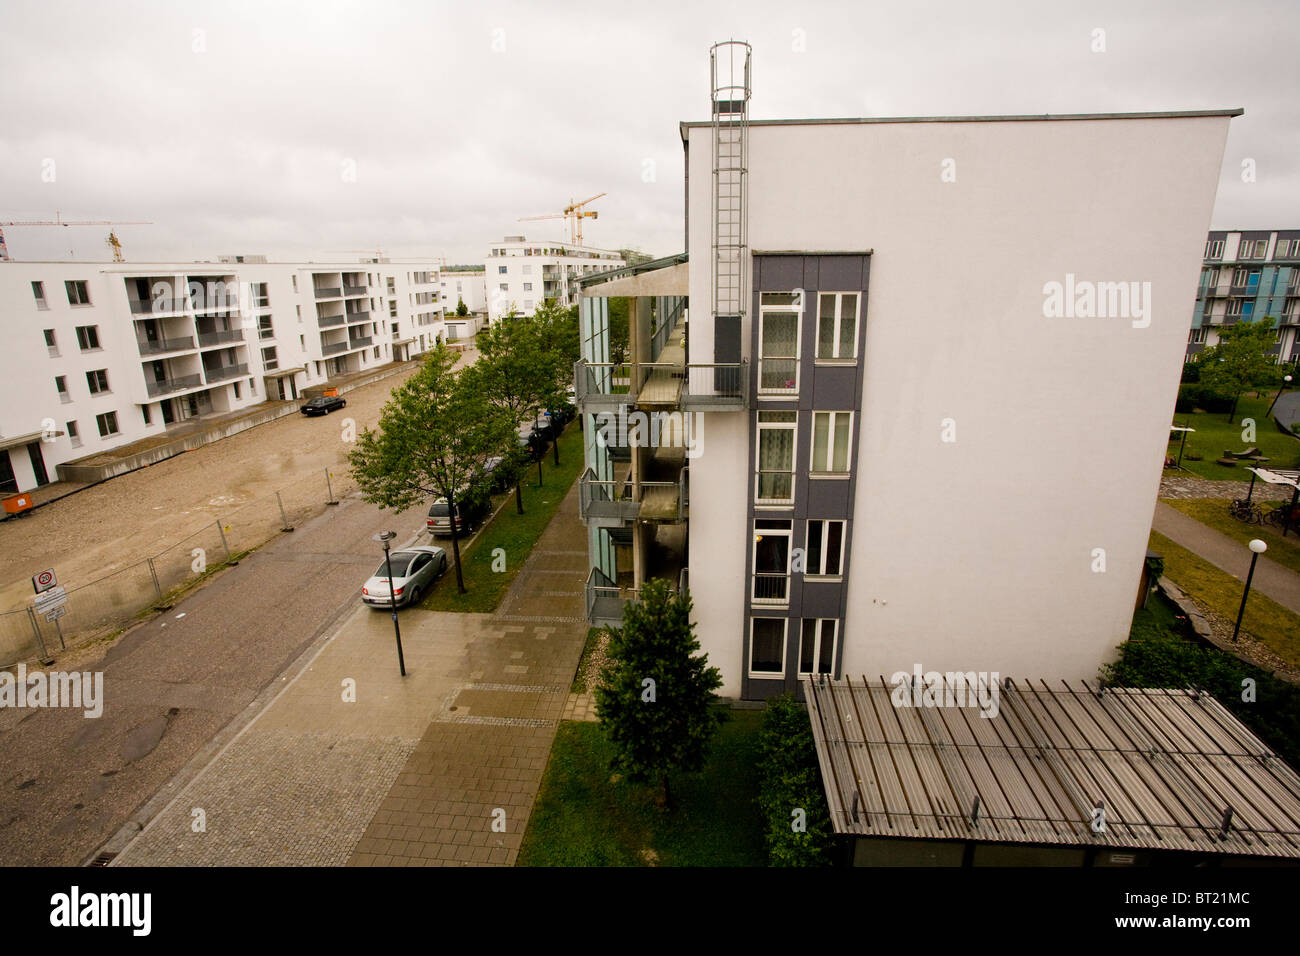 A drab and dreary social housing estate in Germany on an overcast and wet day. Stock Photo